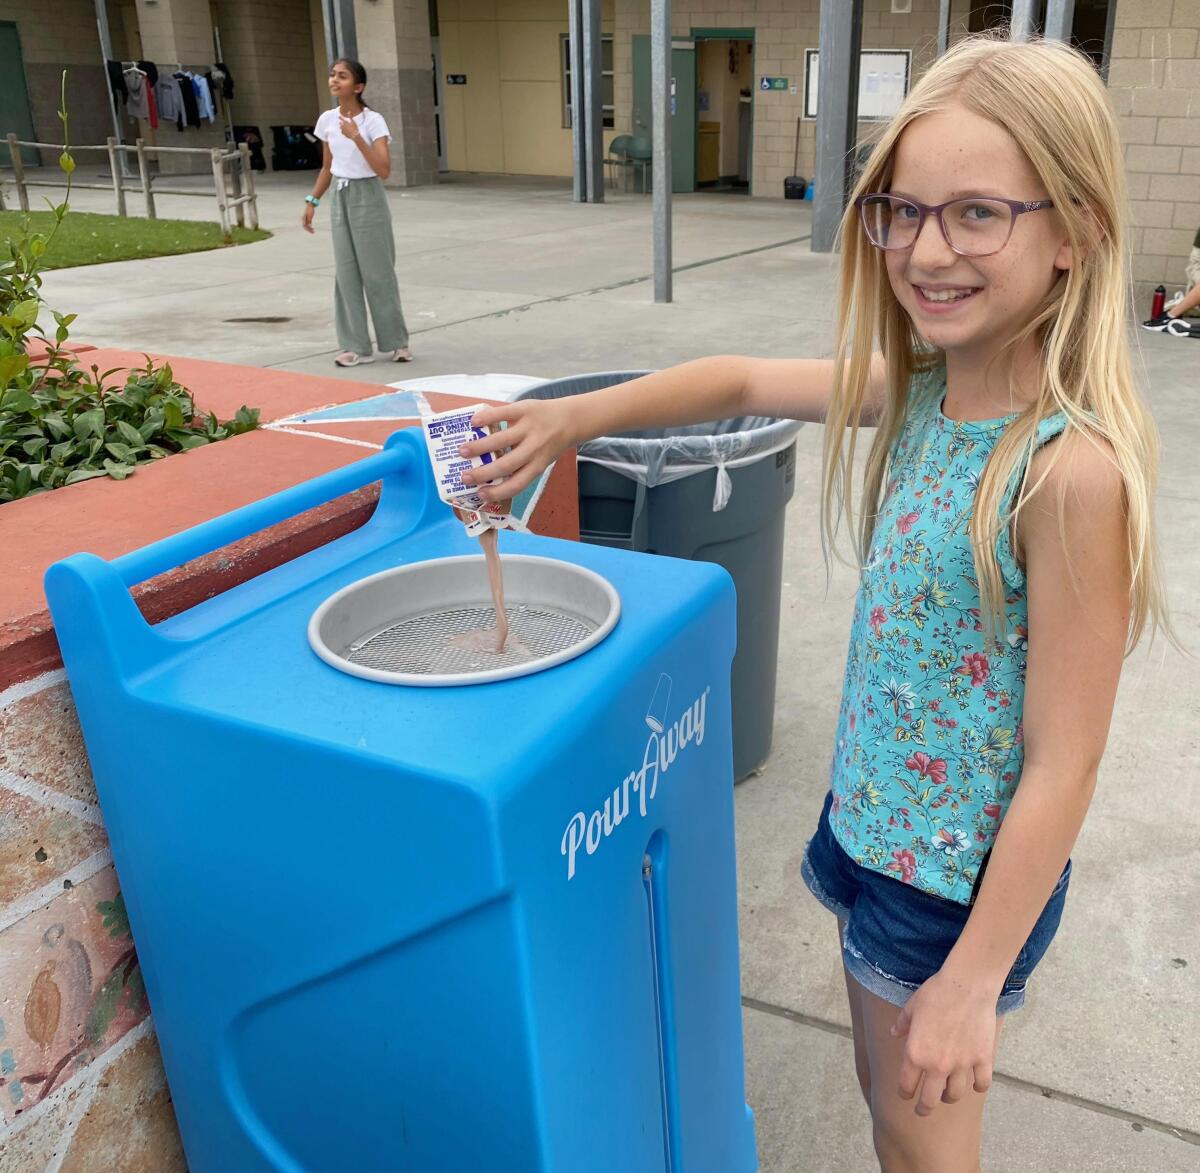 Oak Valley Middle School sixth-grader Evie Matthews uses the PourAway Station before recycling her milk carton.